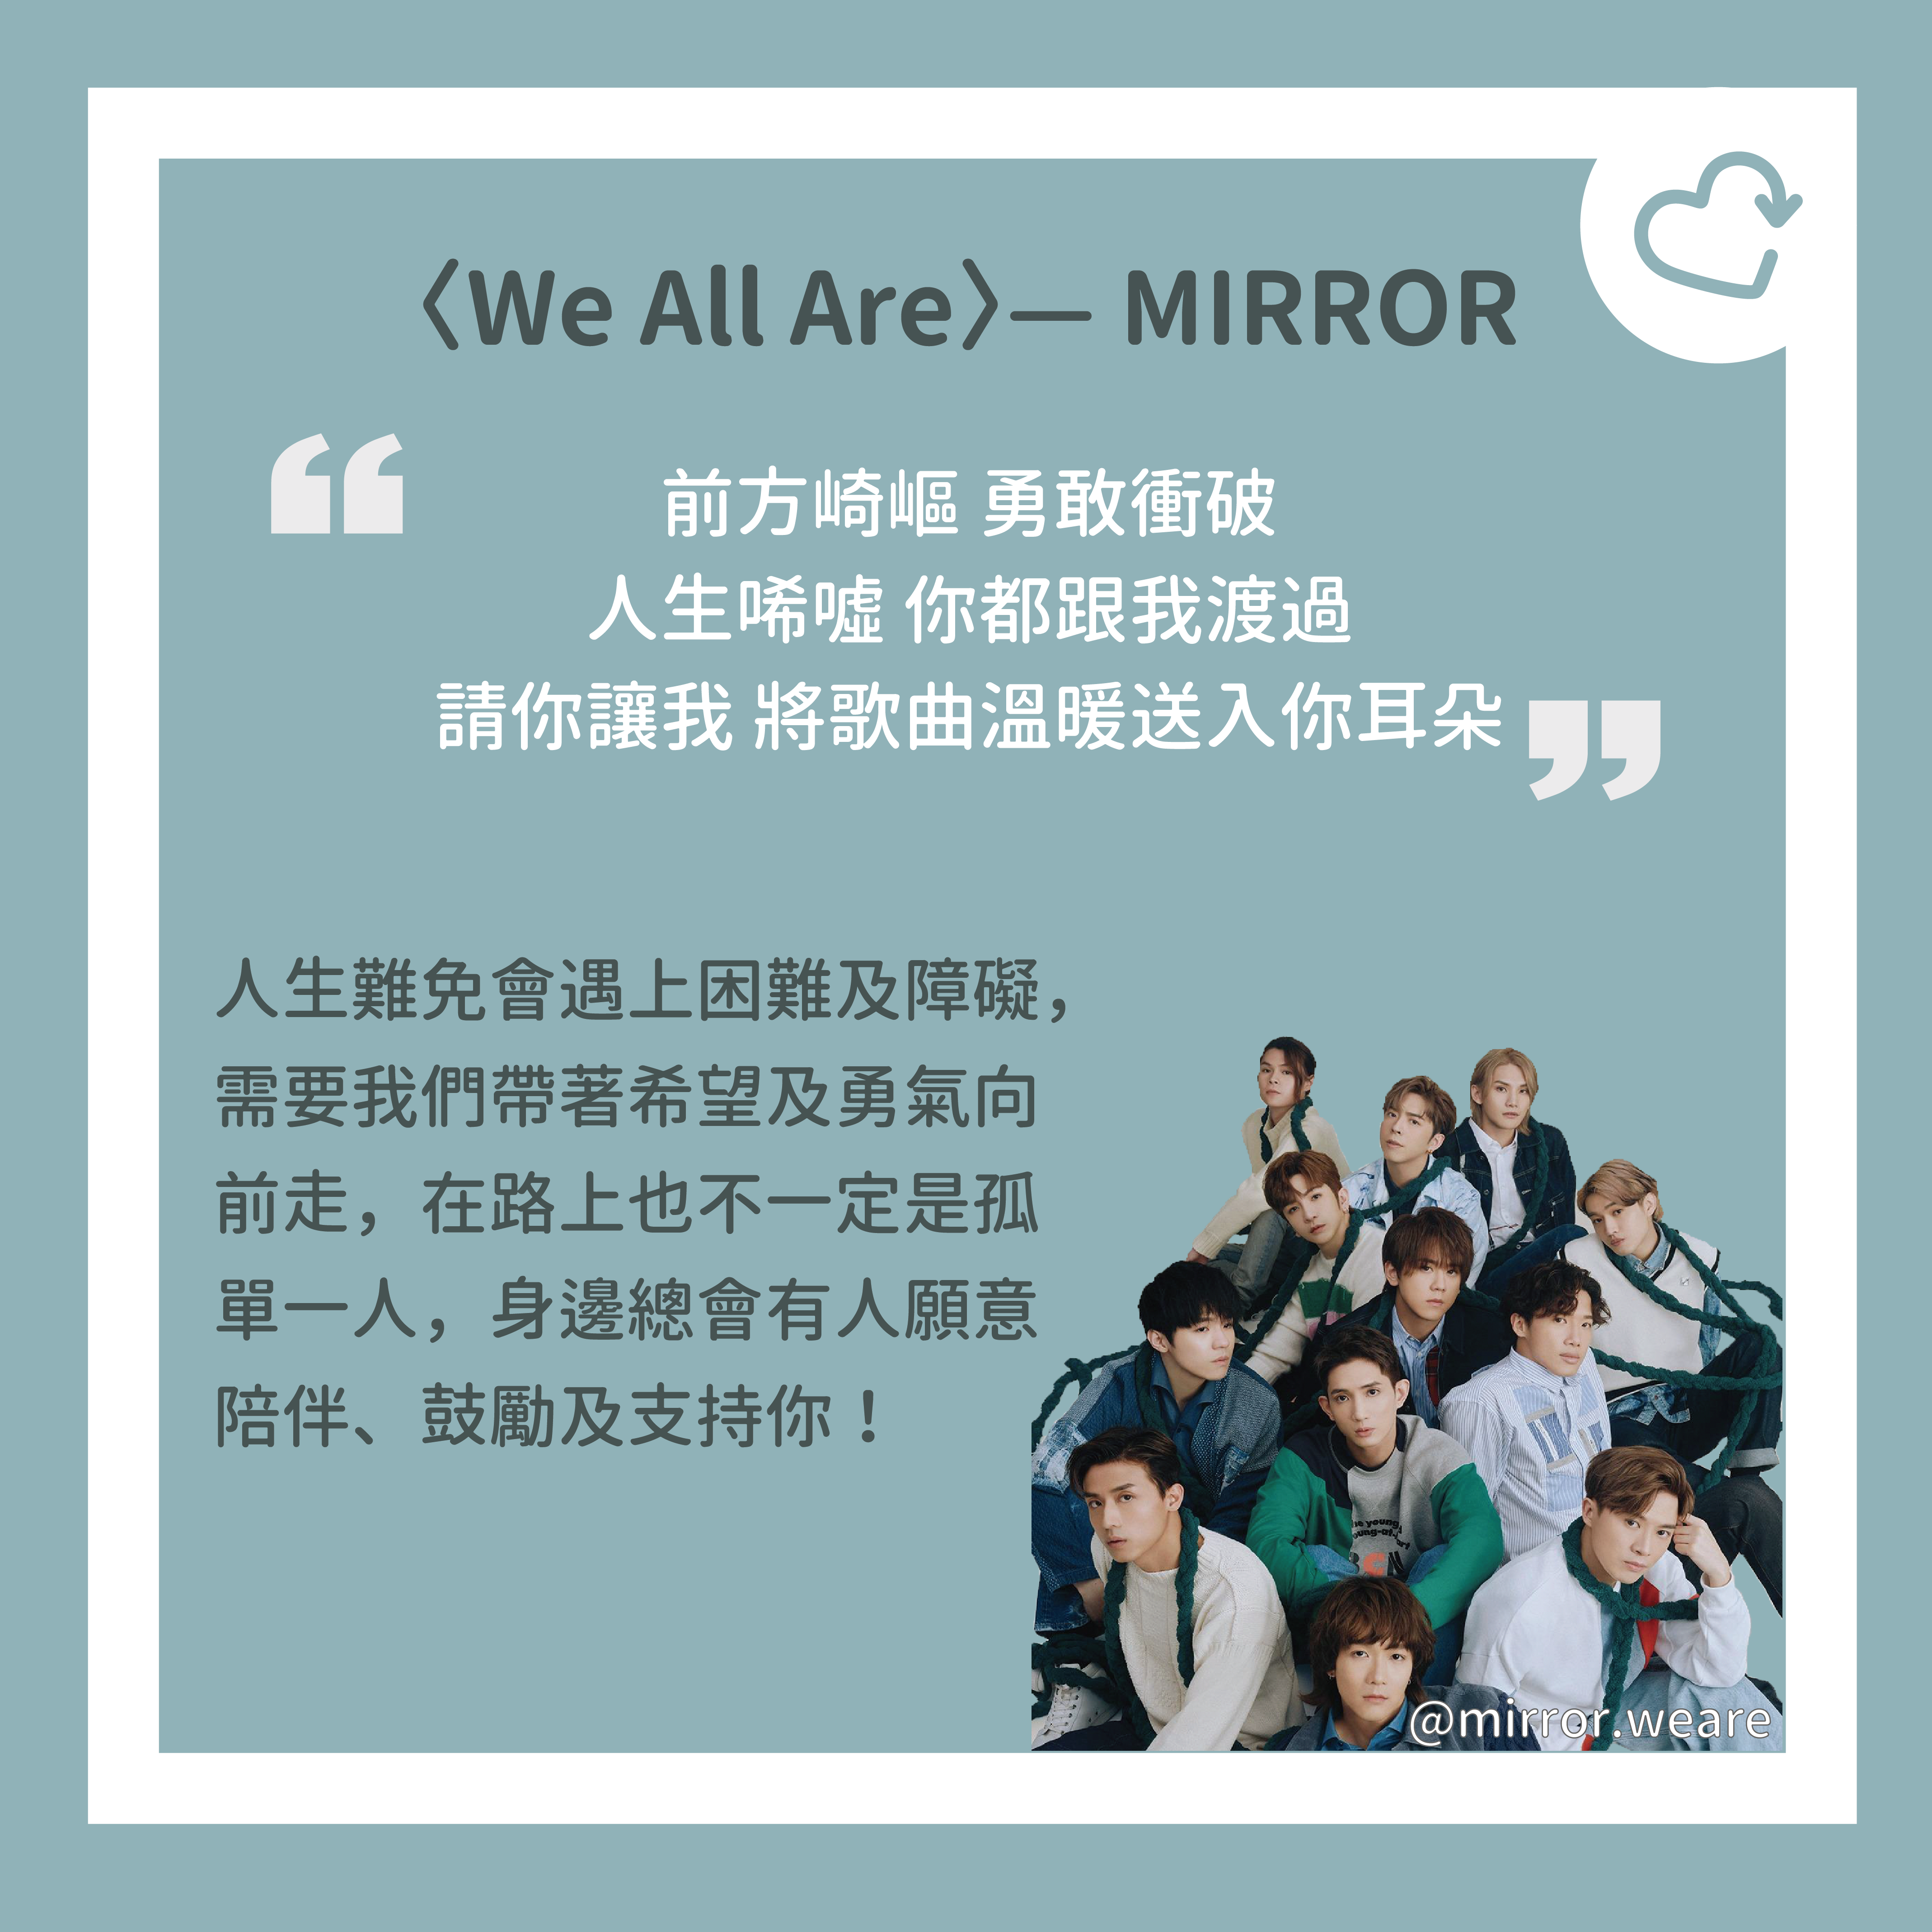 MIRROR we all are